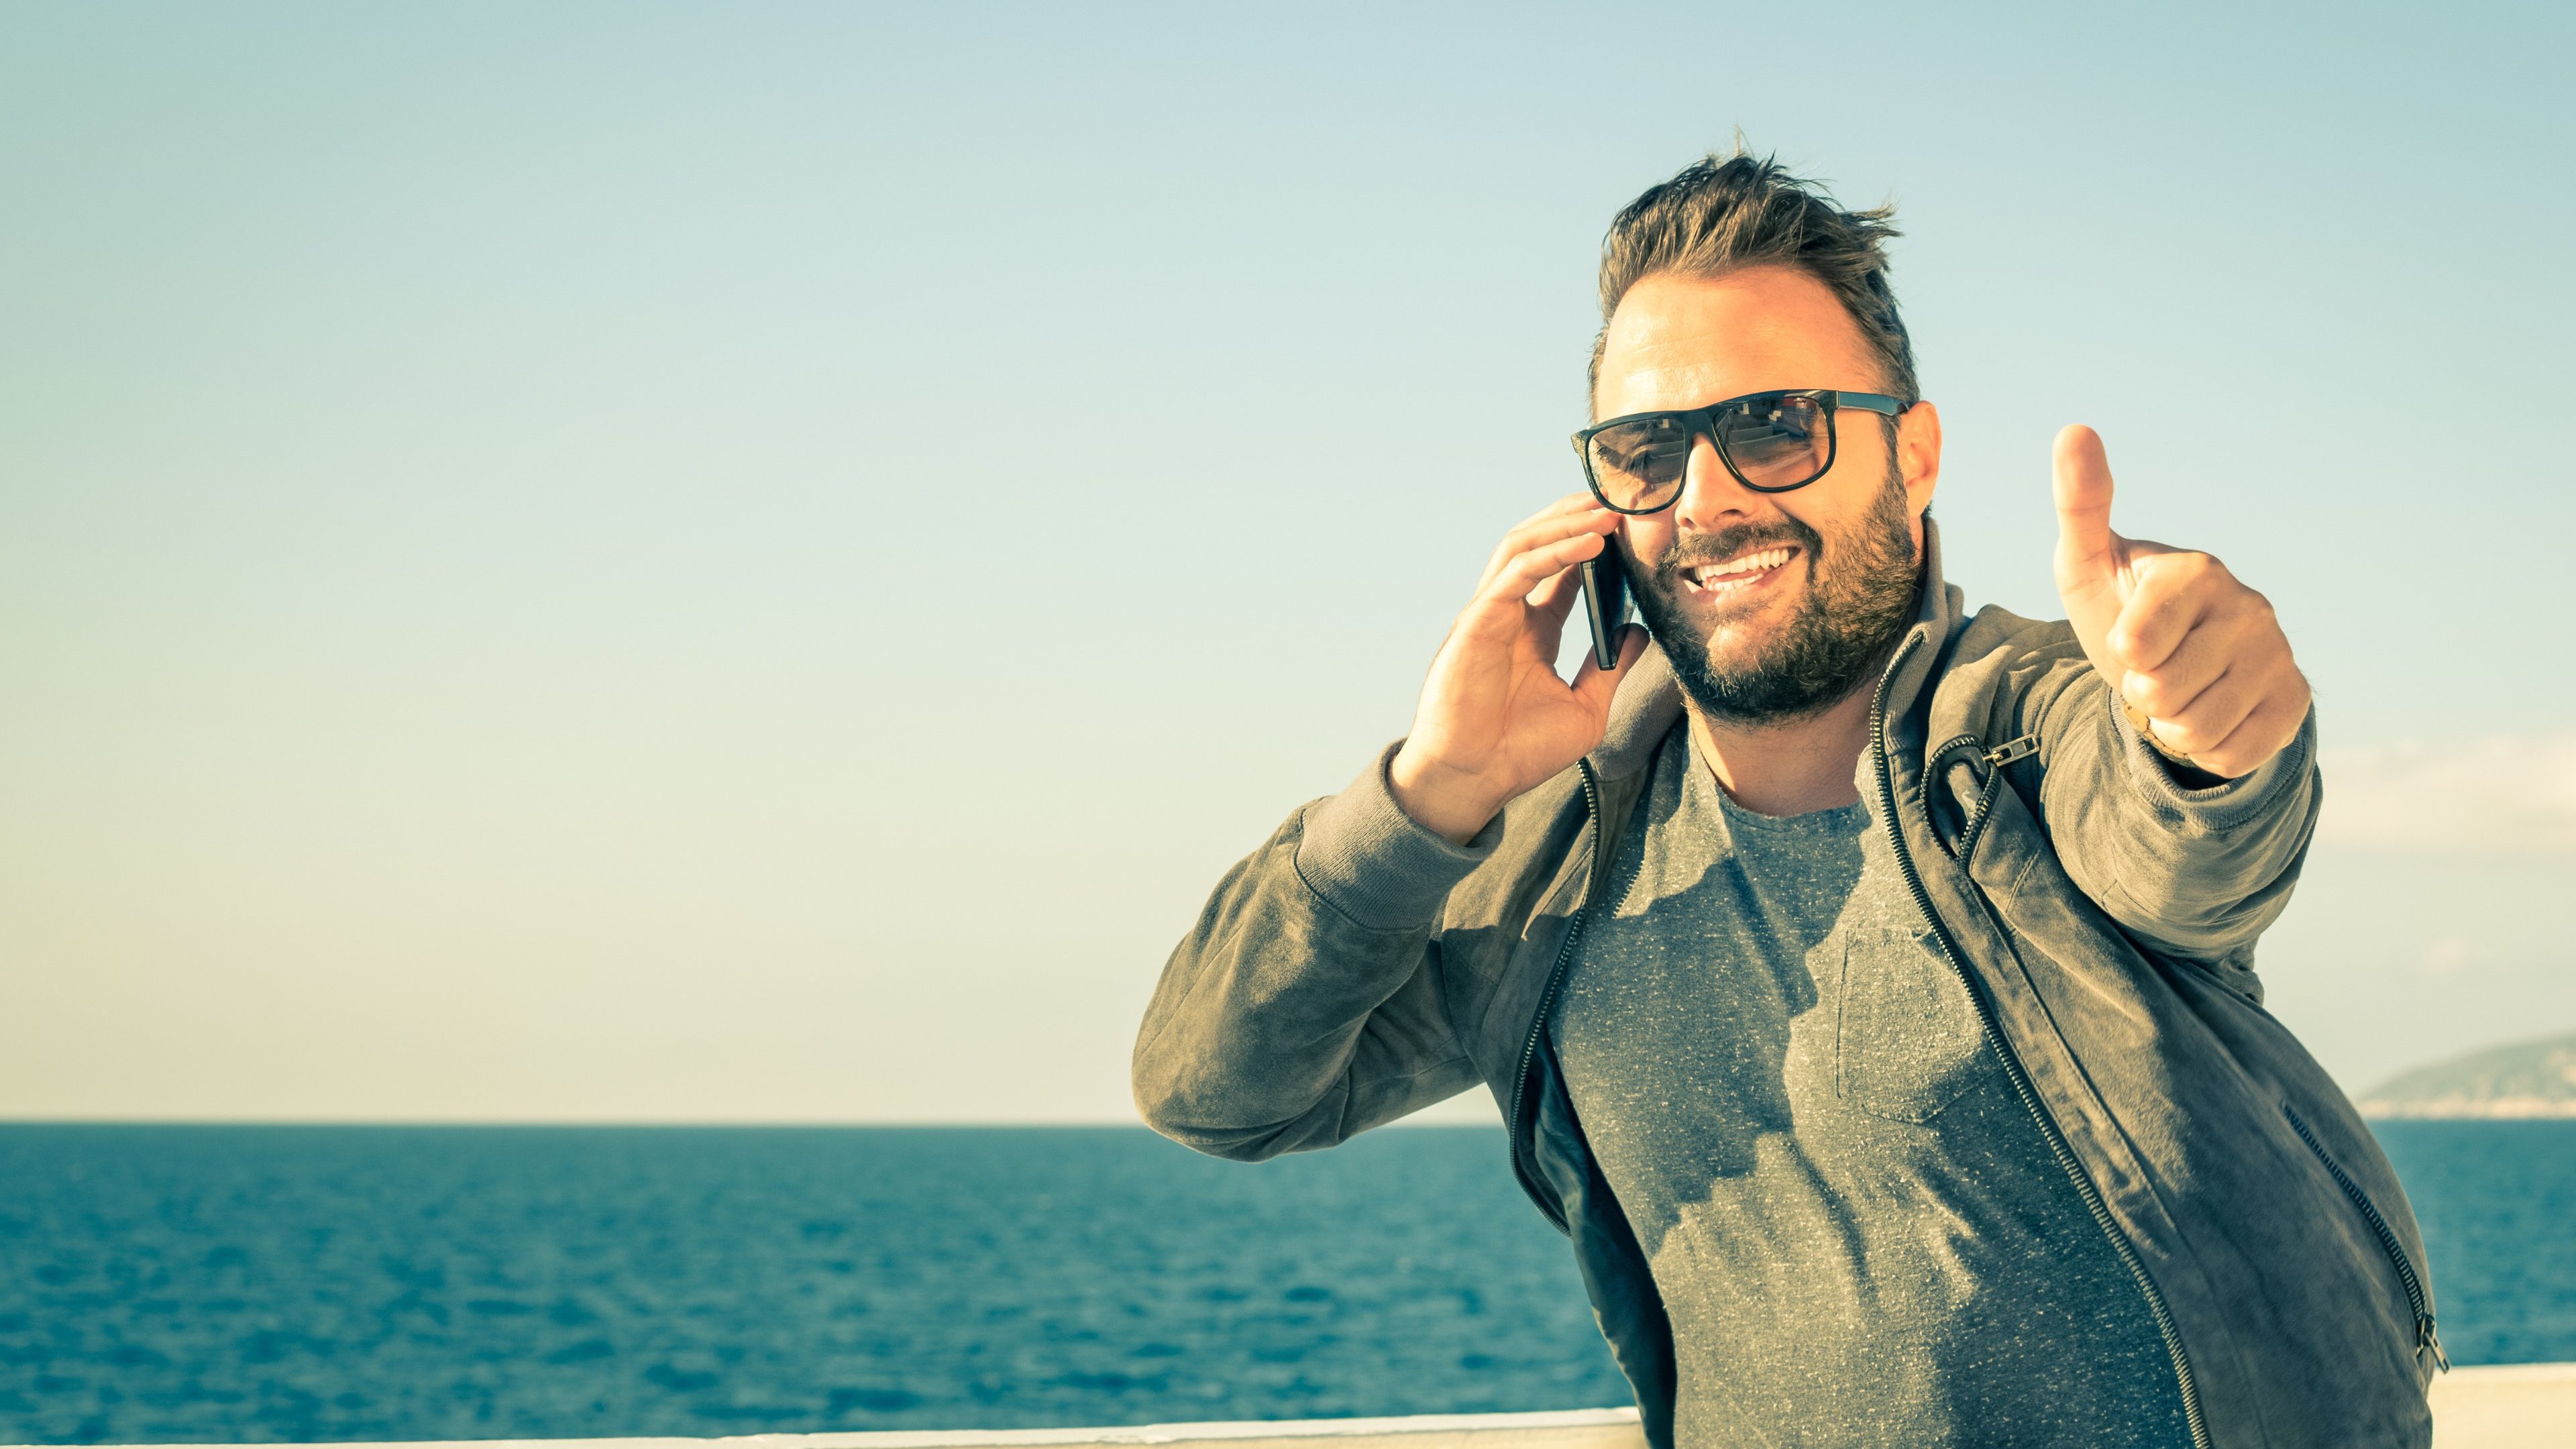 Young handsome man with thumbs up during a phone call with his smartphone - Concept of technology connected with traveller lifestyle - Male model showing success for a mobile telephony company